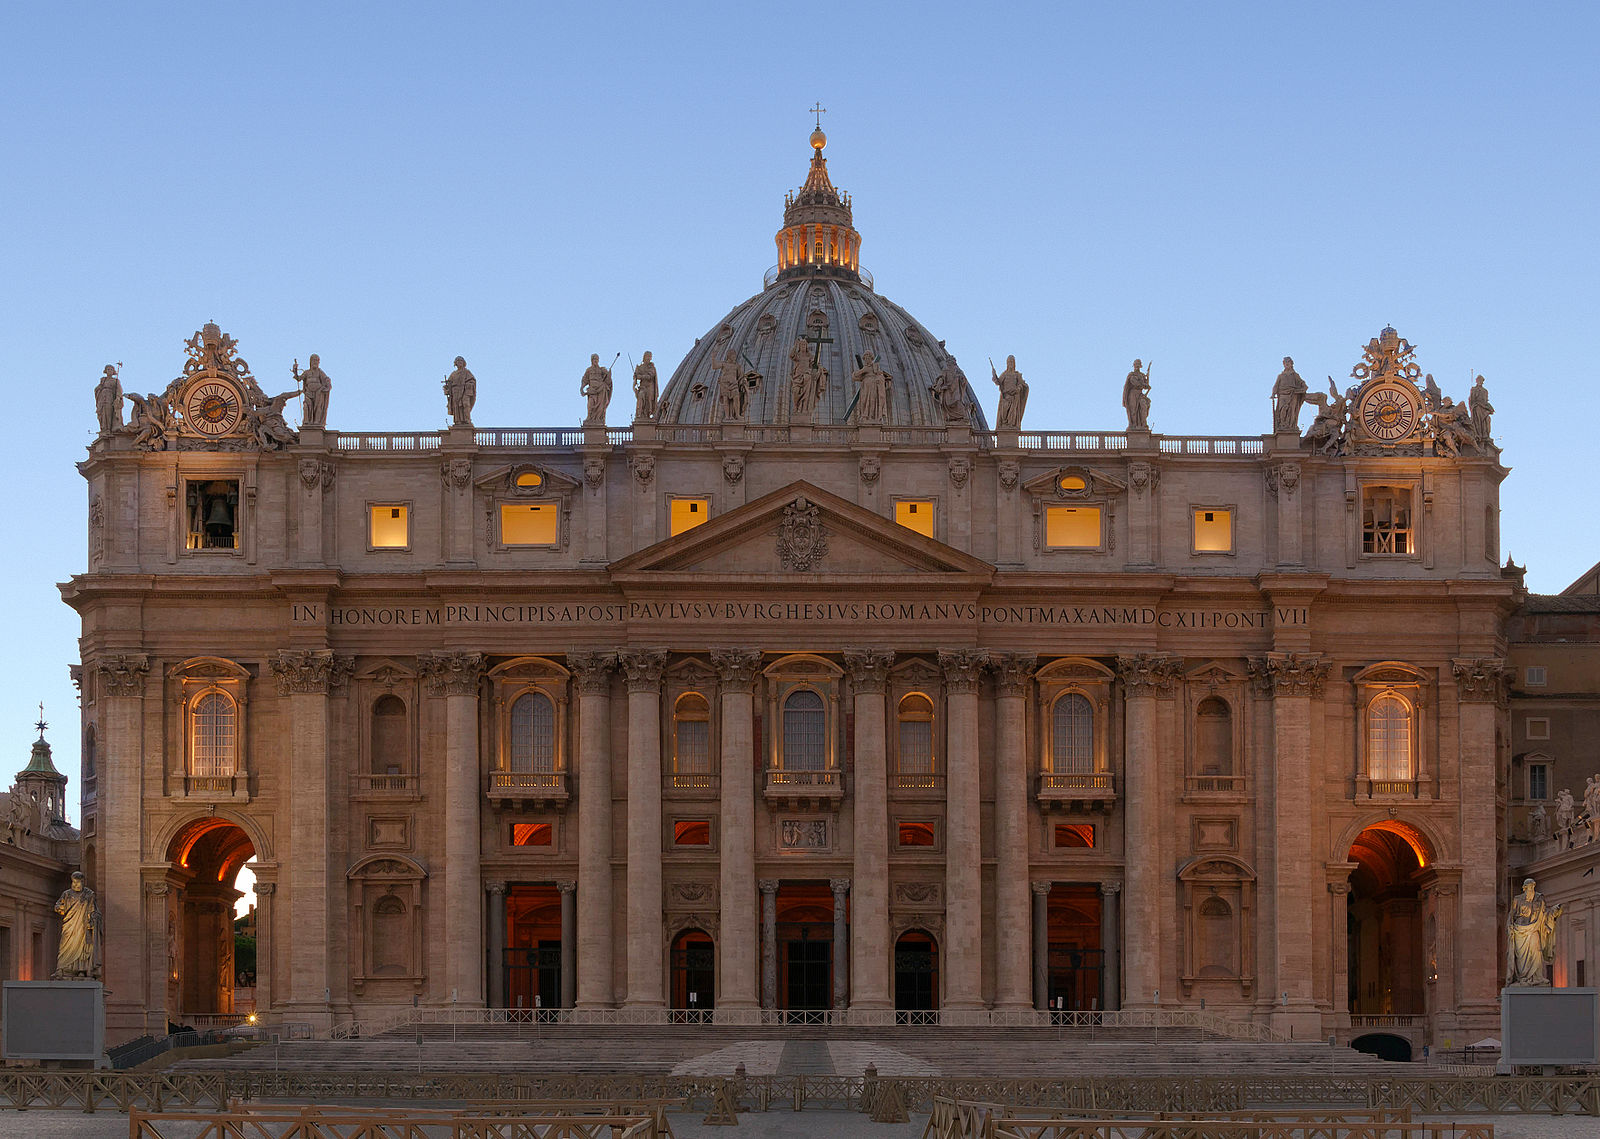 St. Peter’s Basilica is one of the world’s most beautiful churches